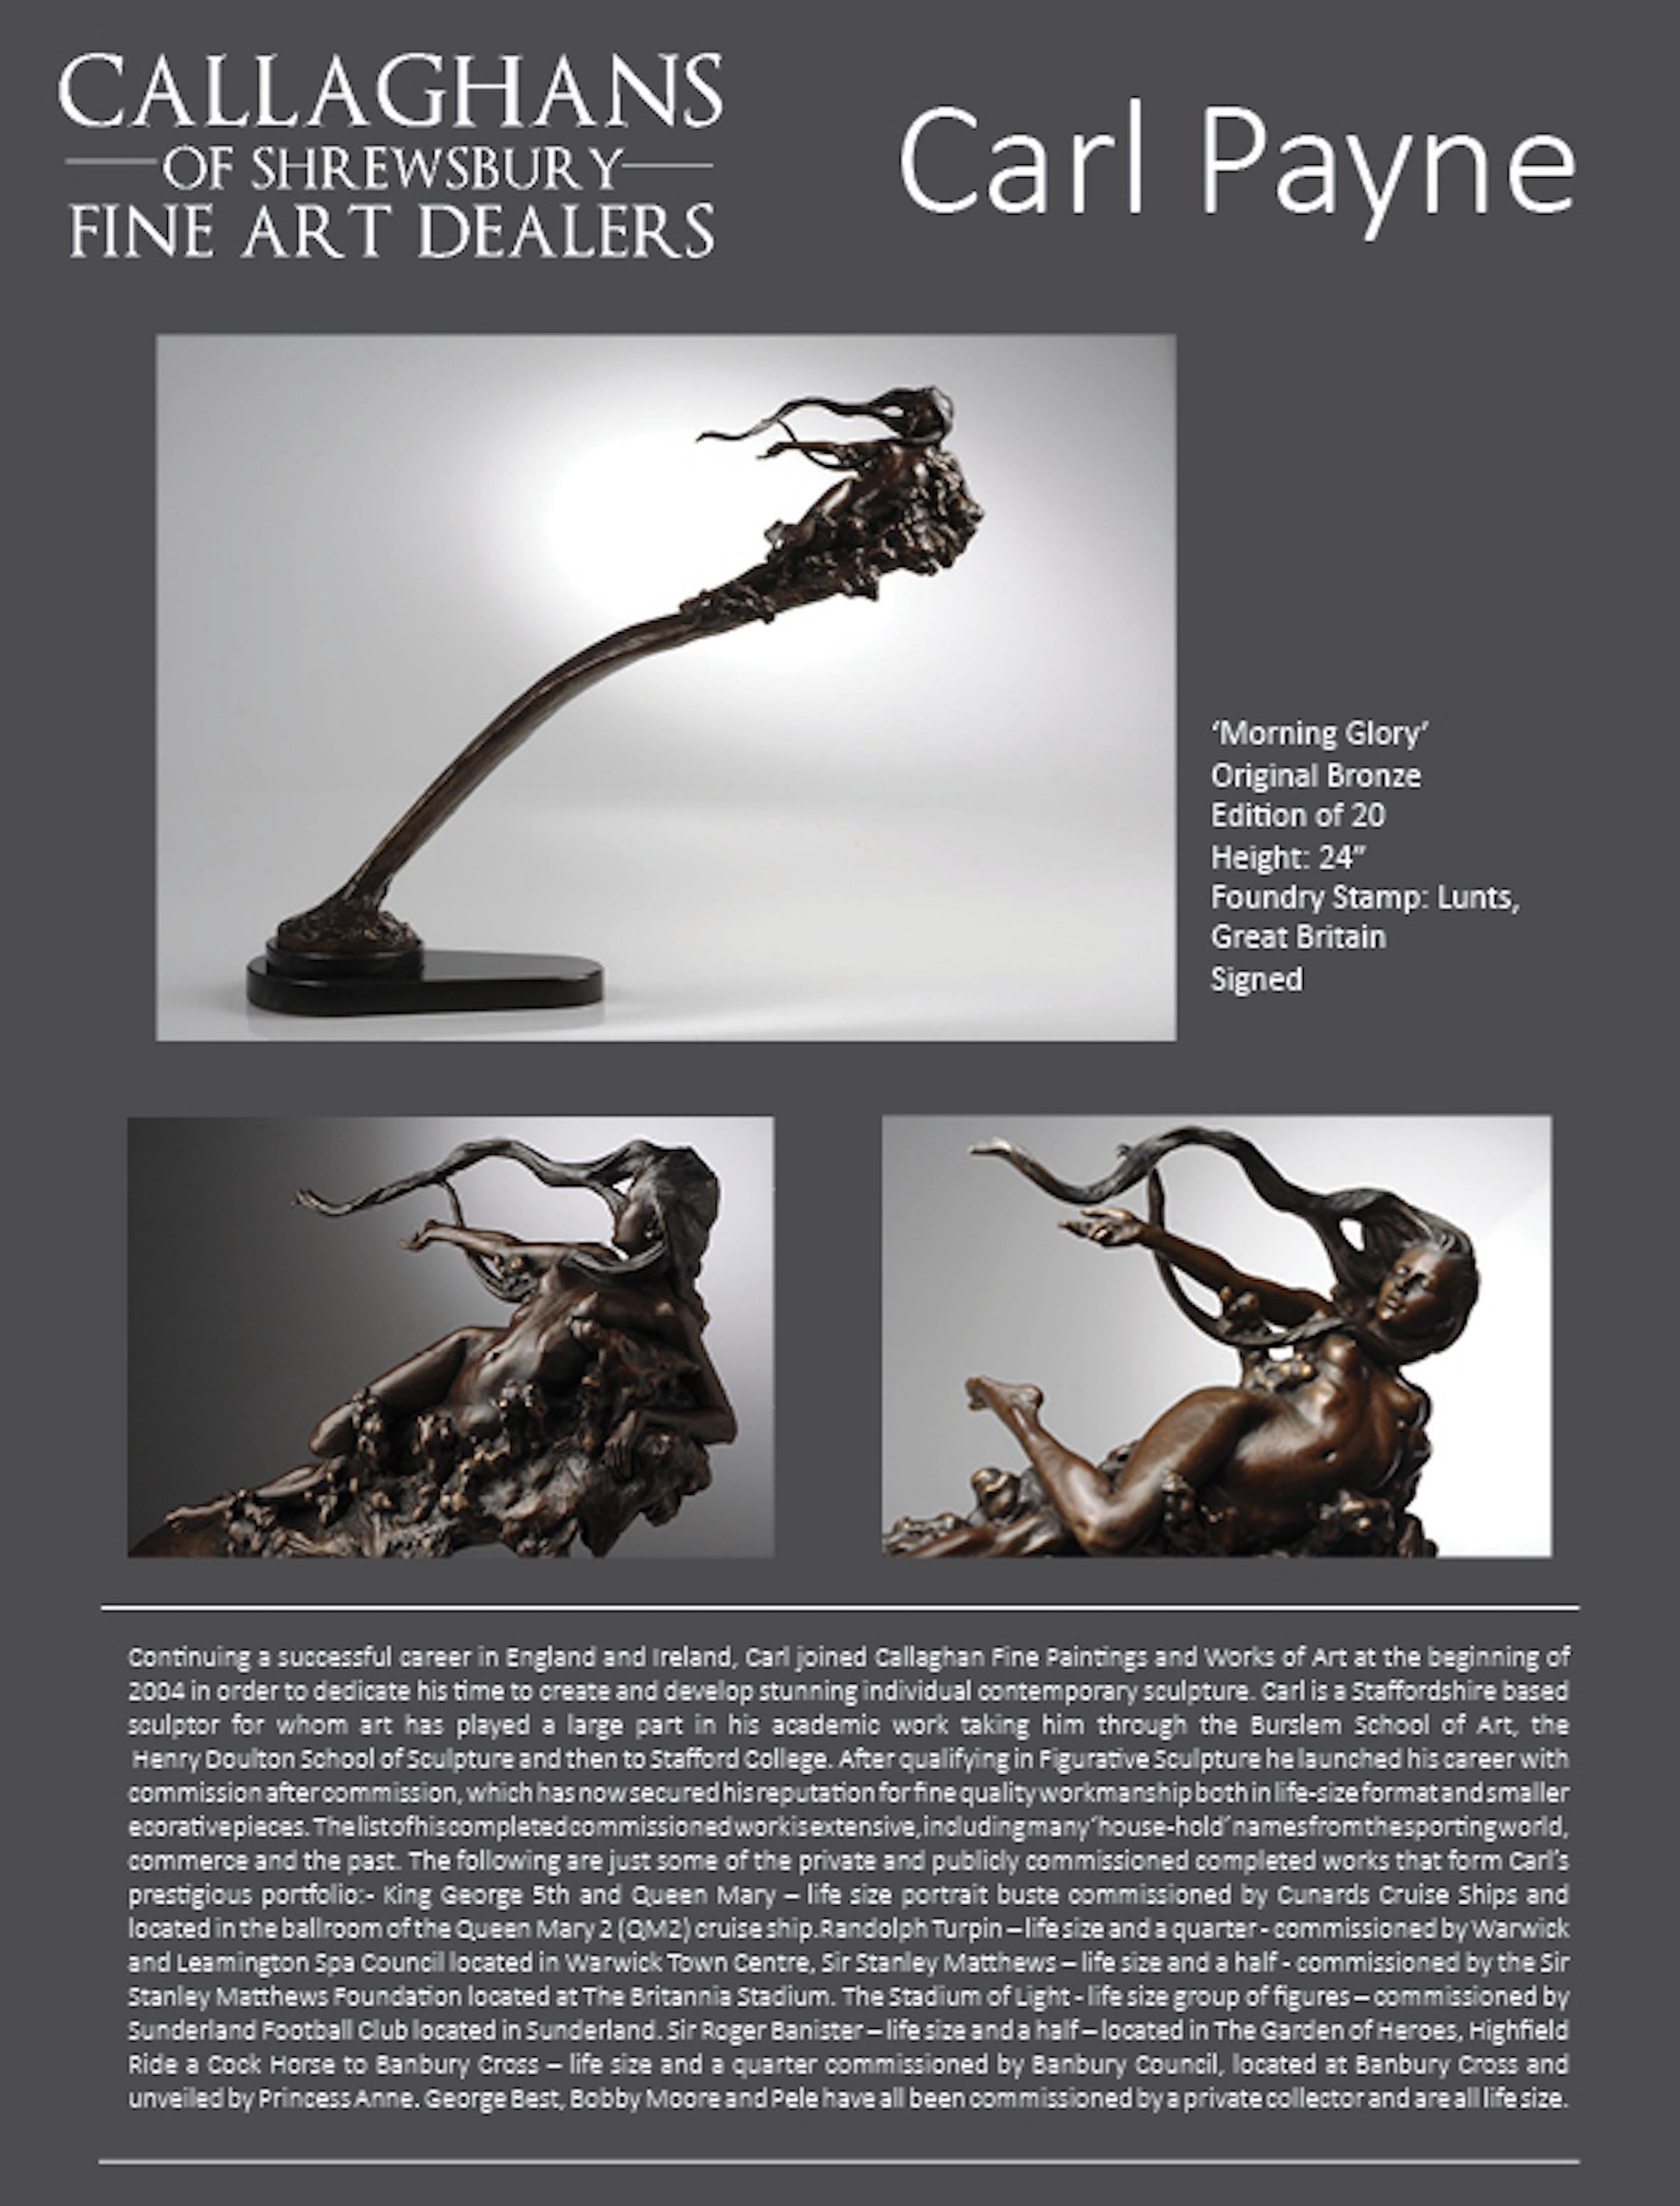 Nude Bronze Figurative Sculpture 'Morning Glory' by Carl Payne For Sale 1